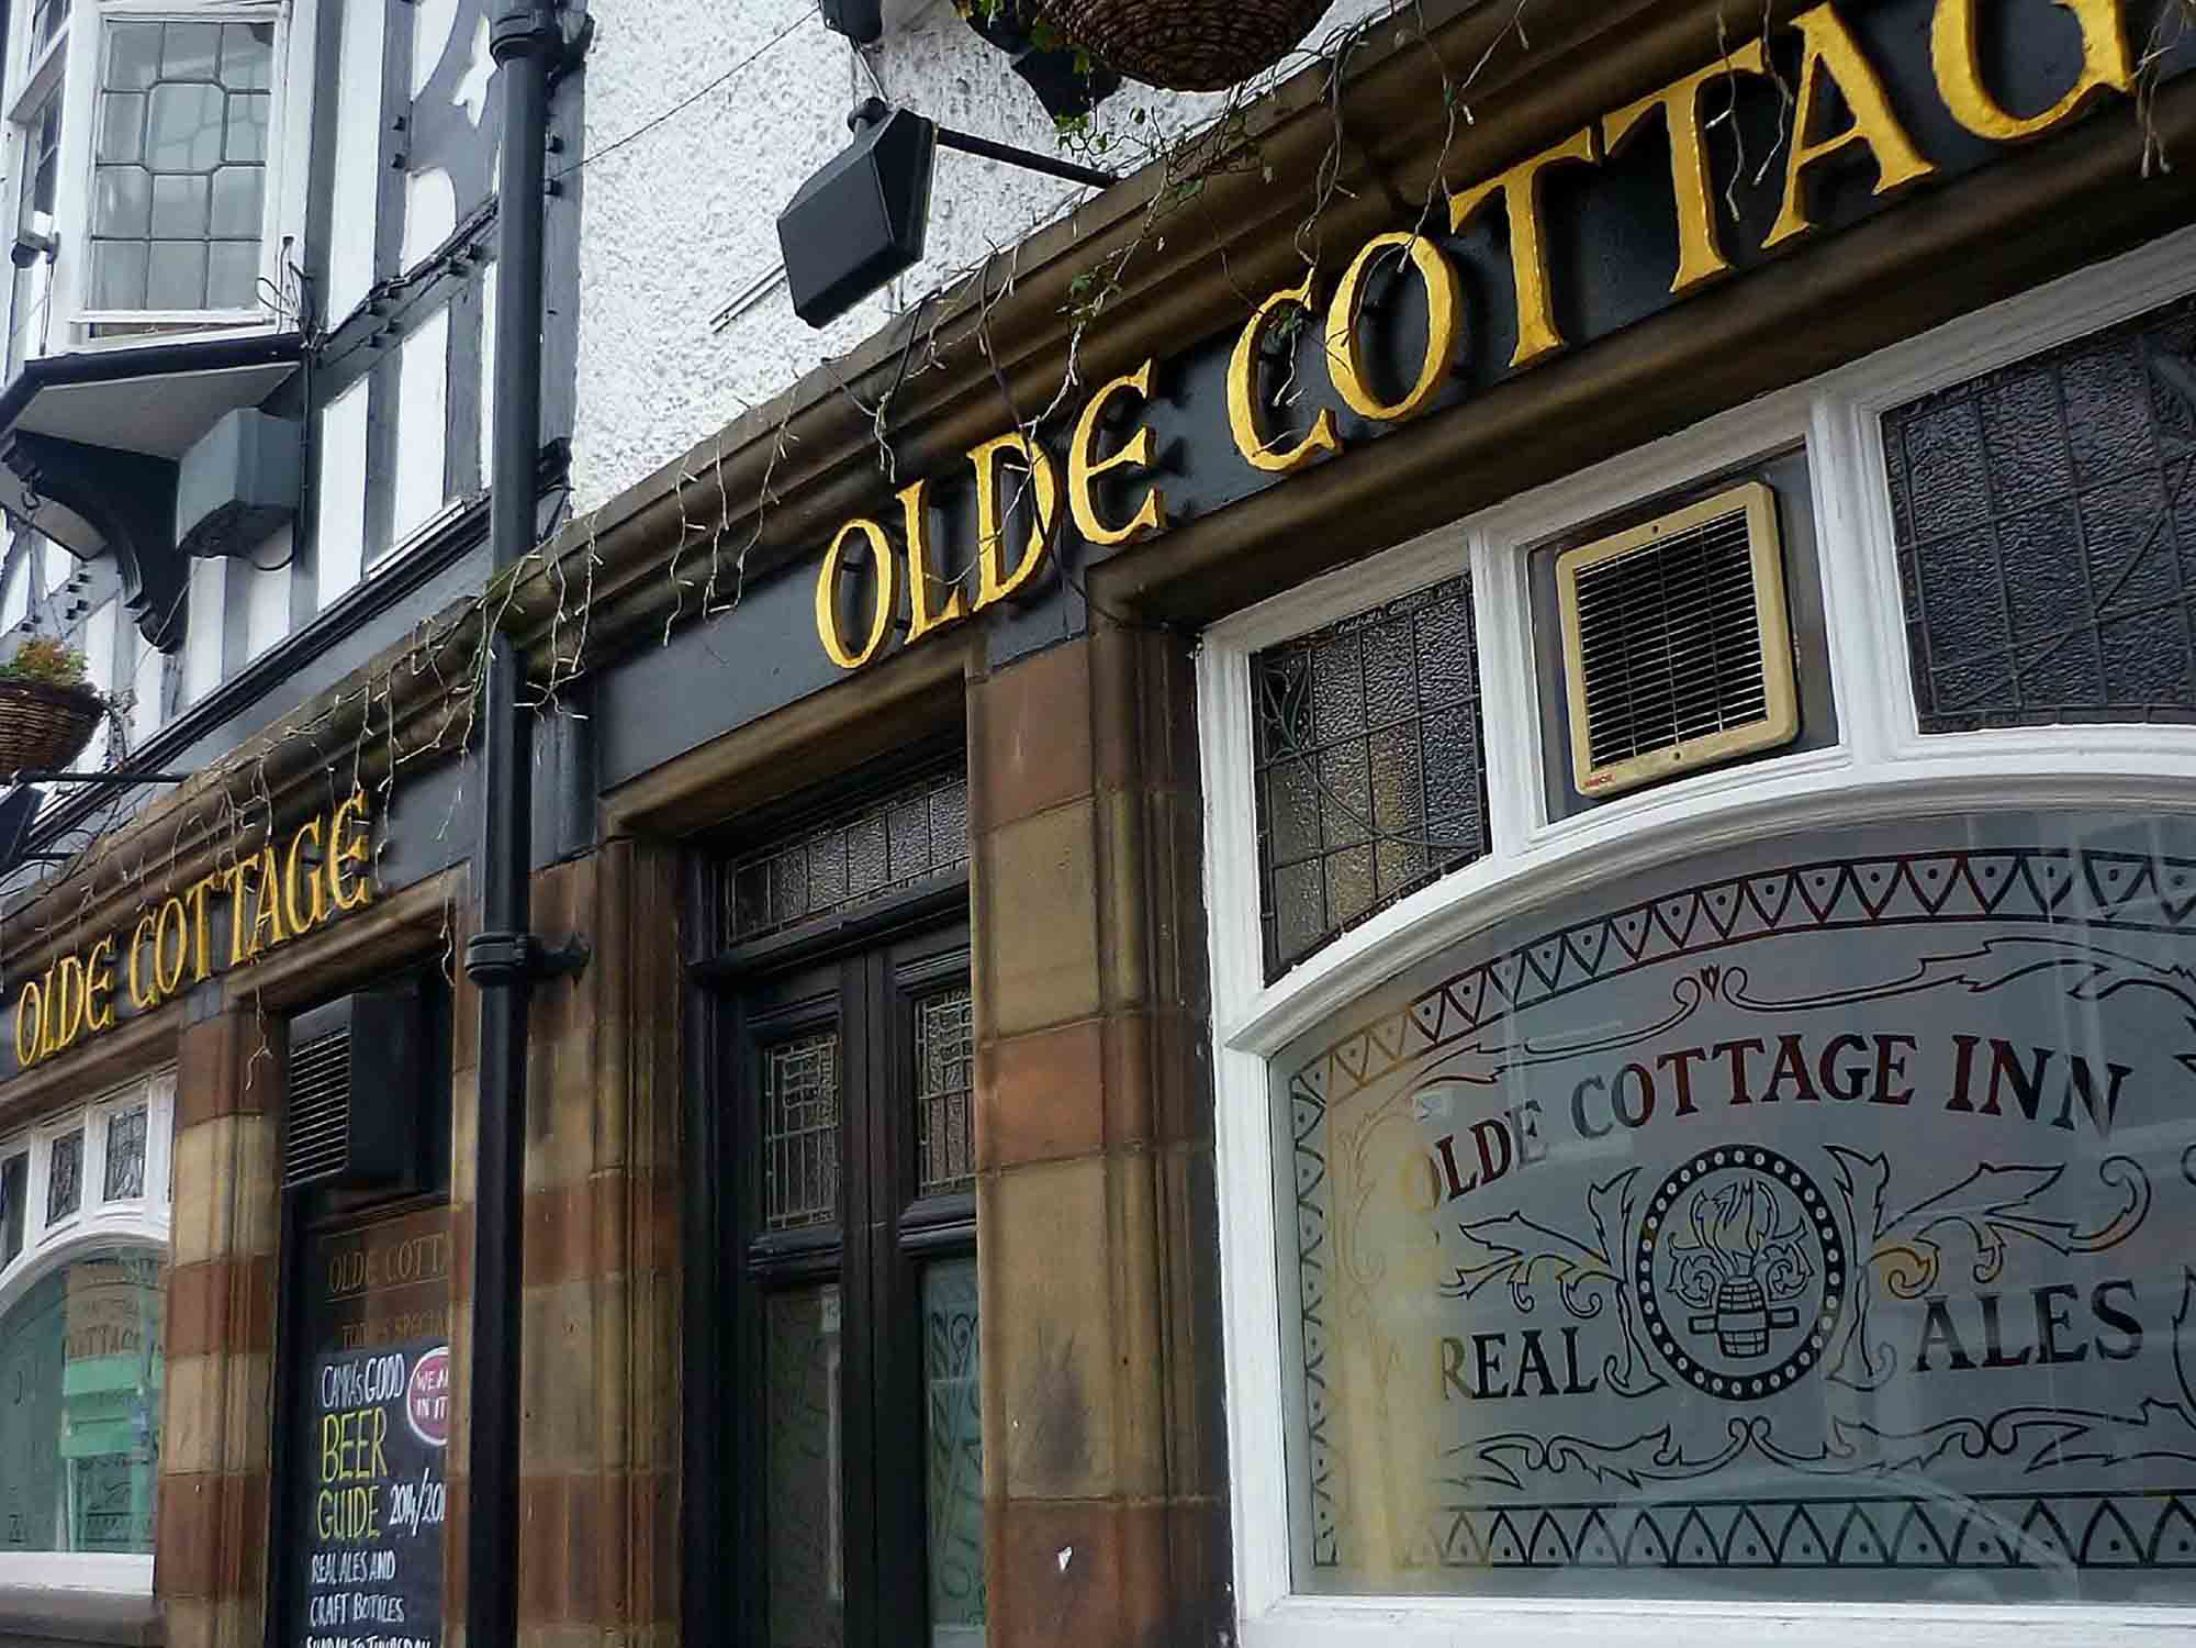 Olde Cottage - Best Real Ale Pubs in Chester